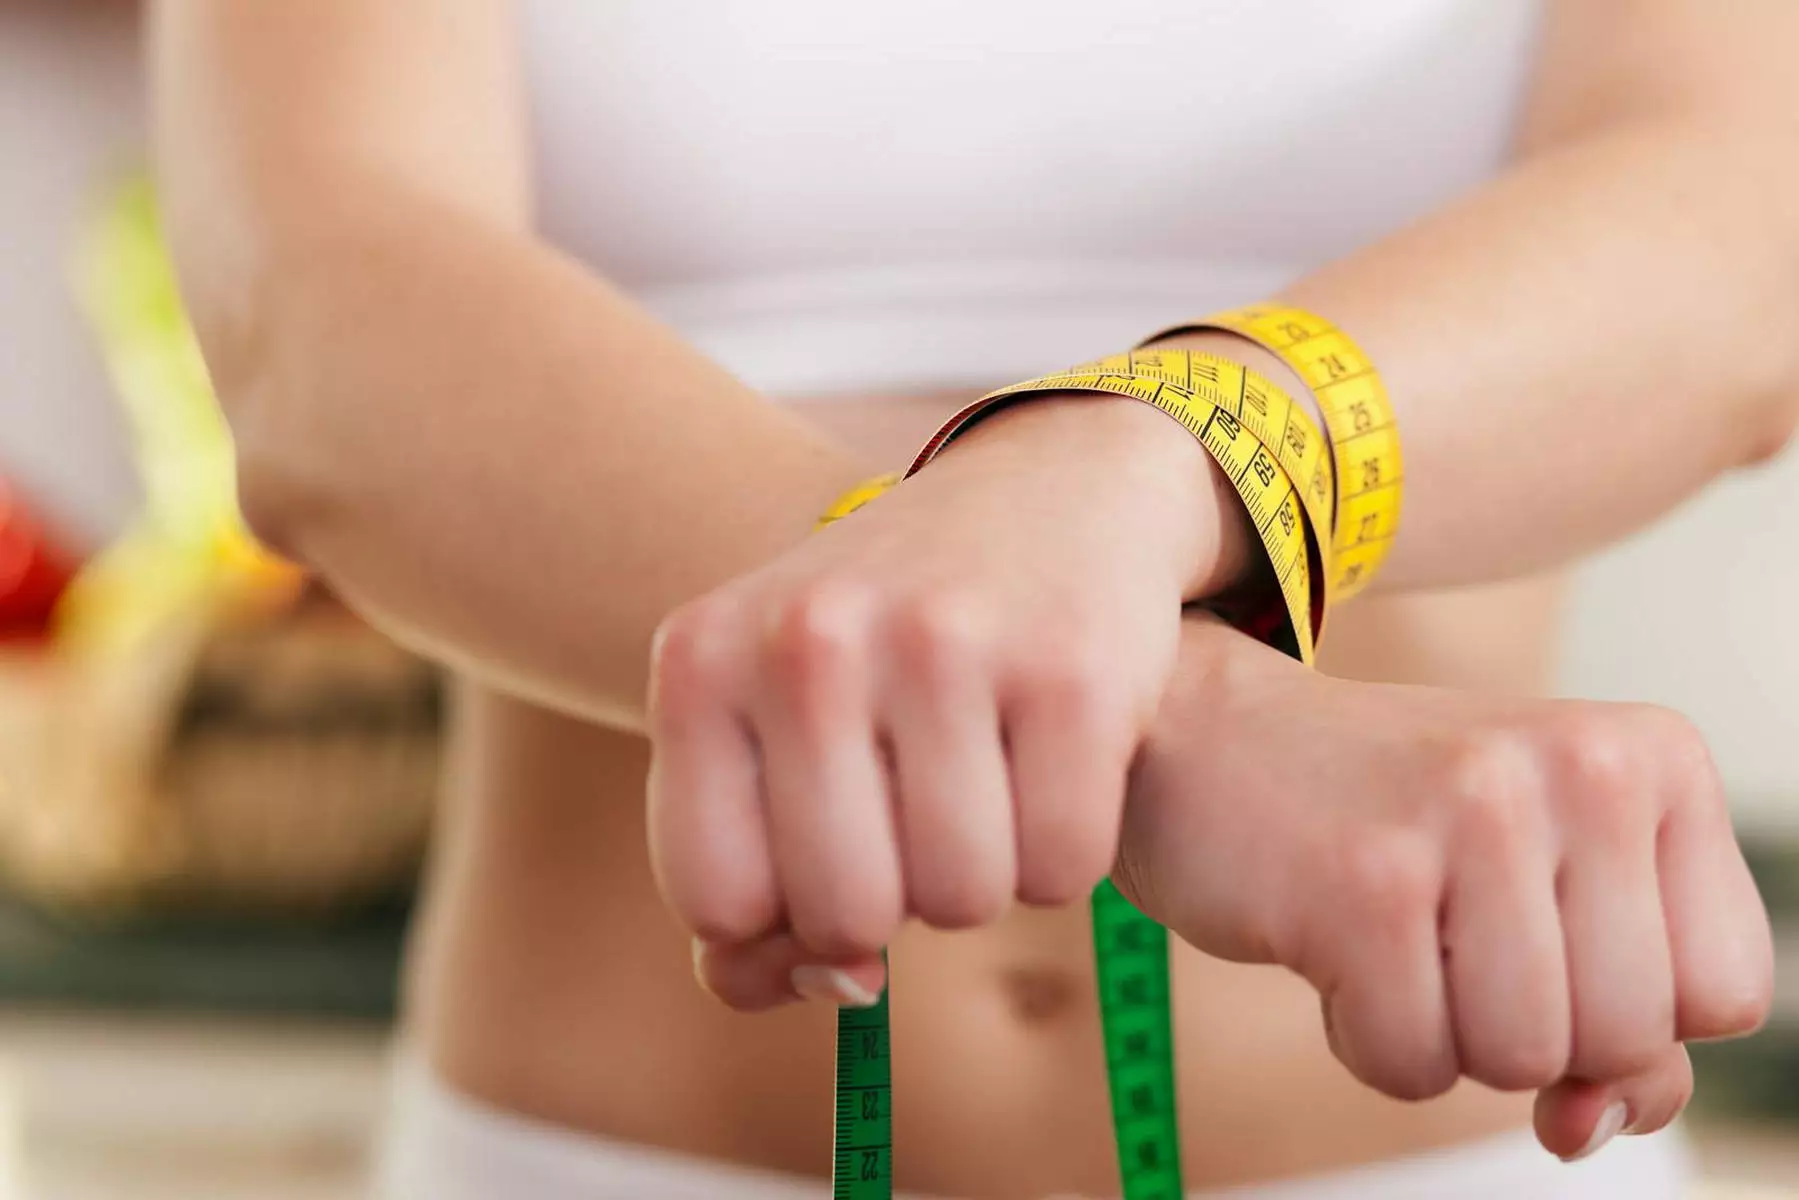 Importance of Eating Disorder Treatment